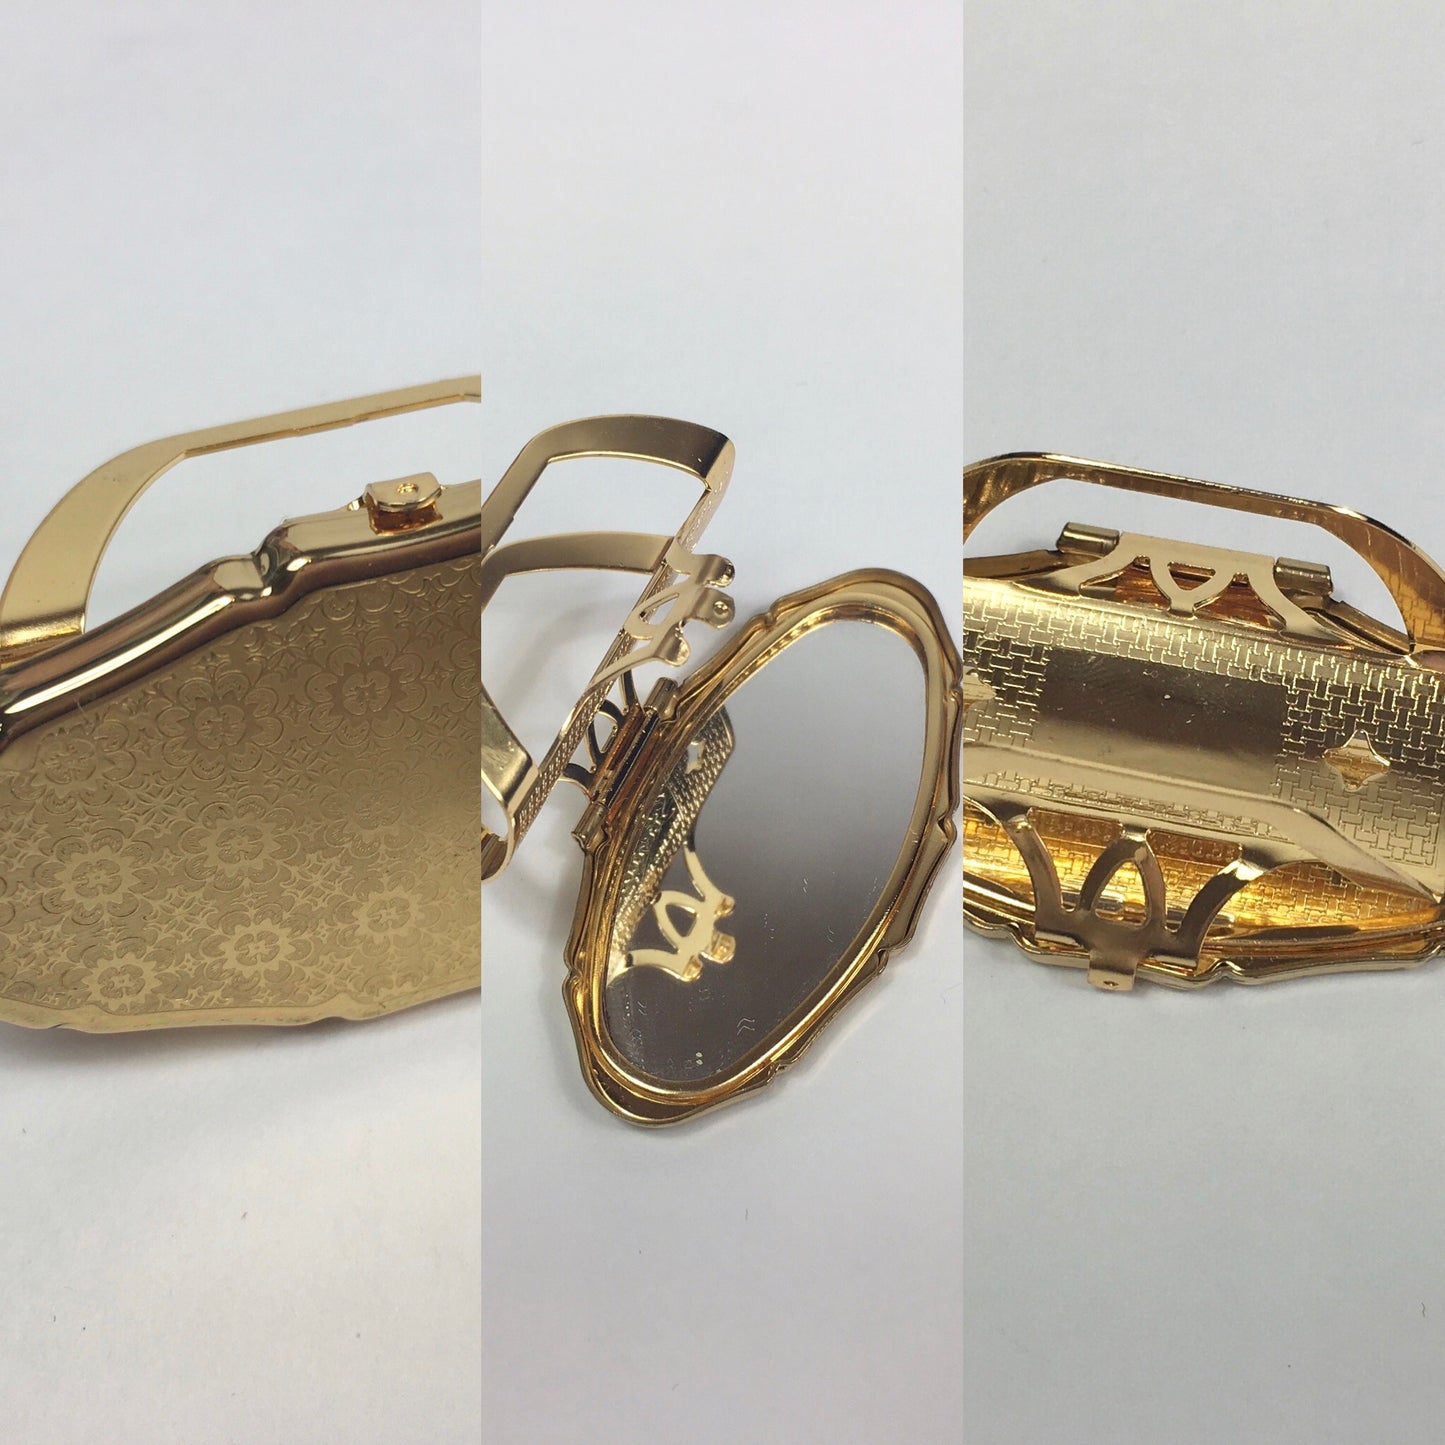 Original 1950’s Stratton Lipview - In A Lovely Warm Gold with Floral Etched Pattern